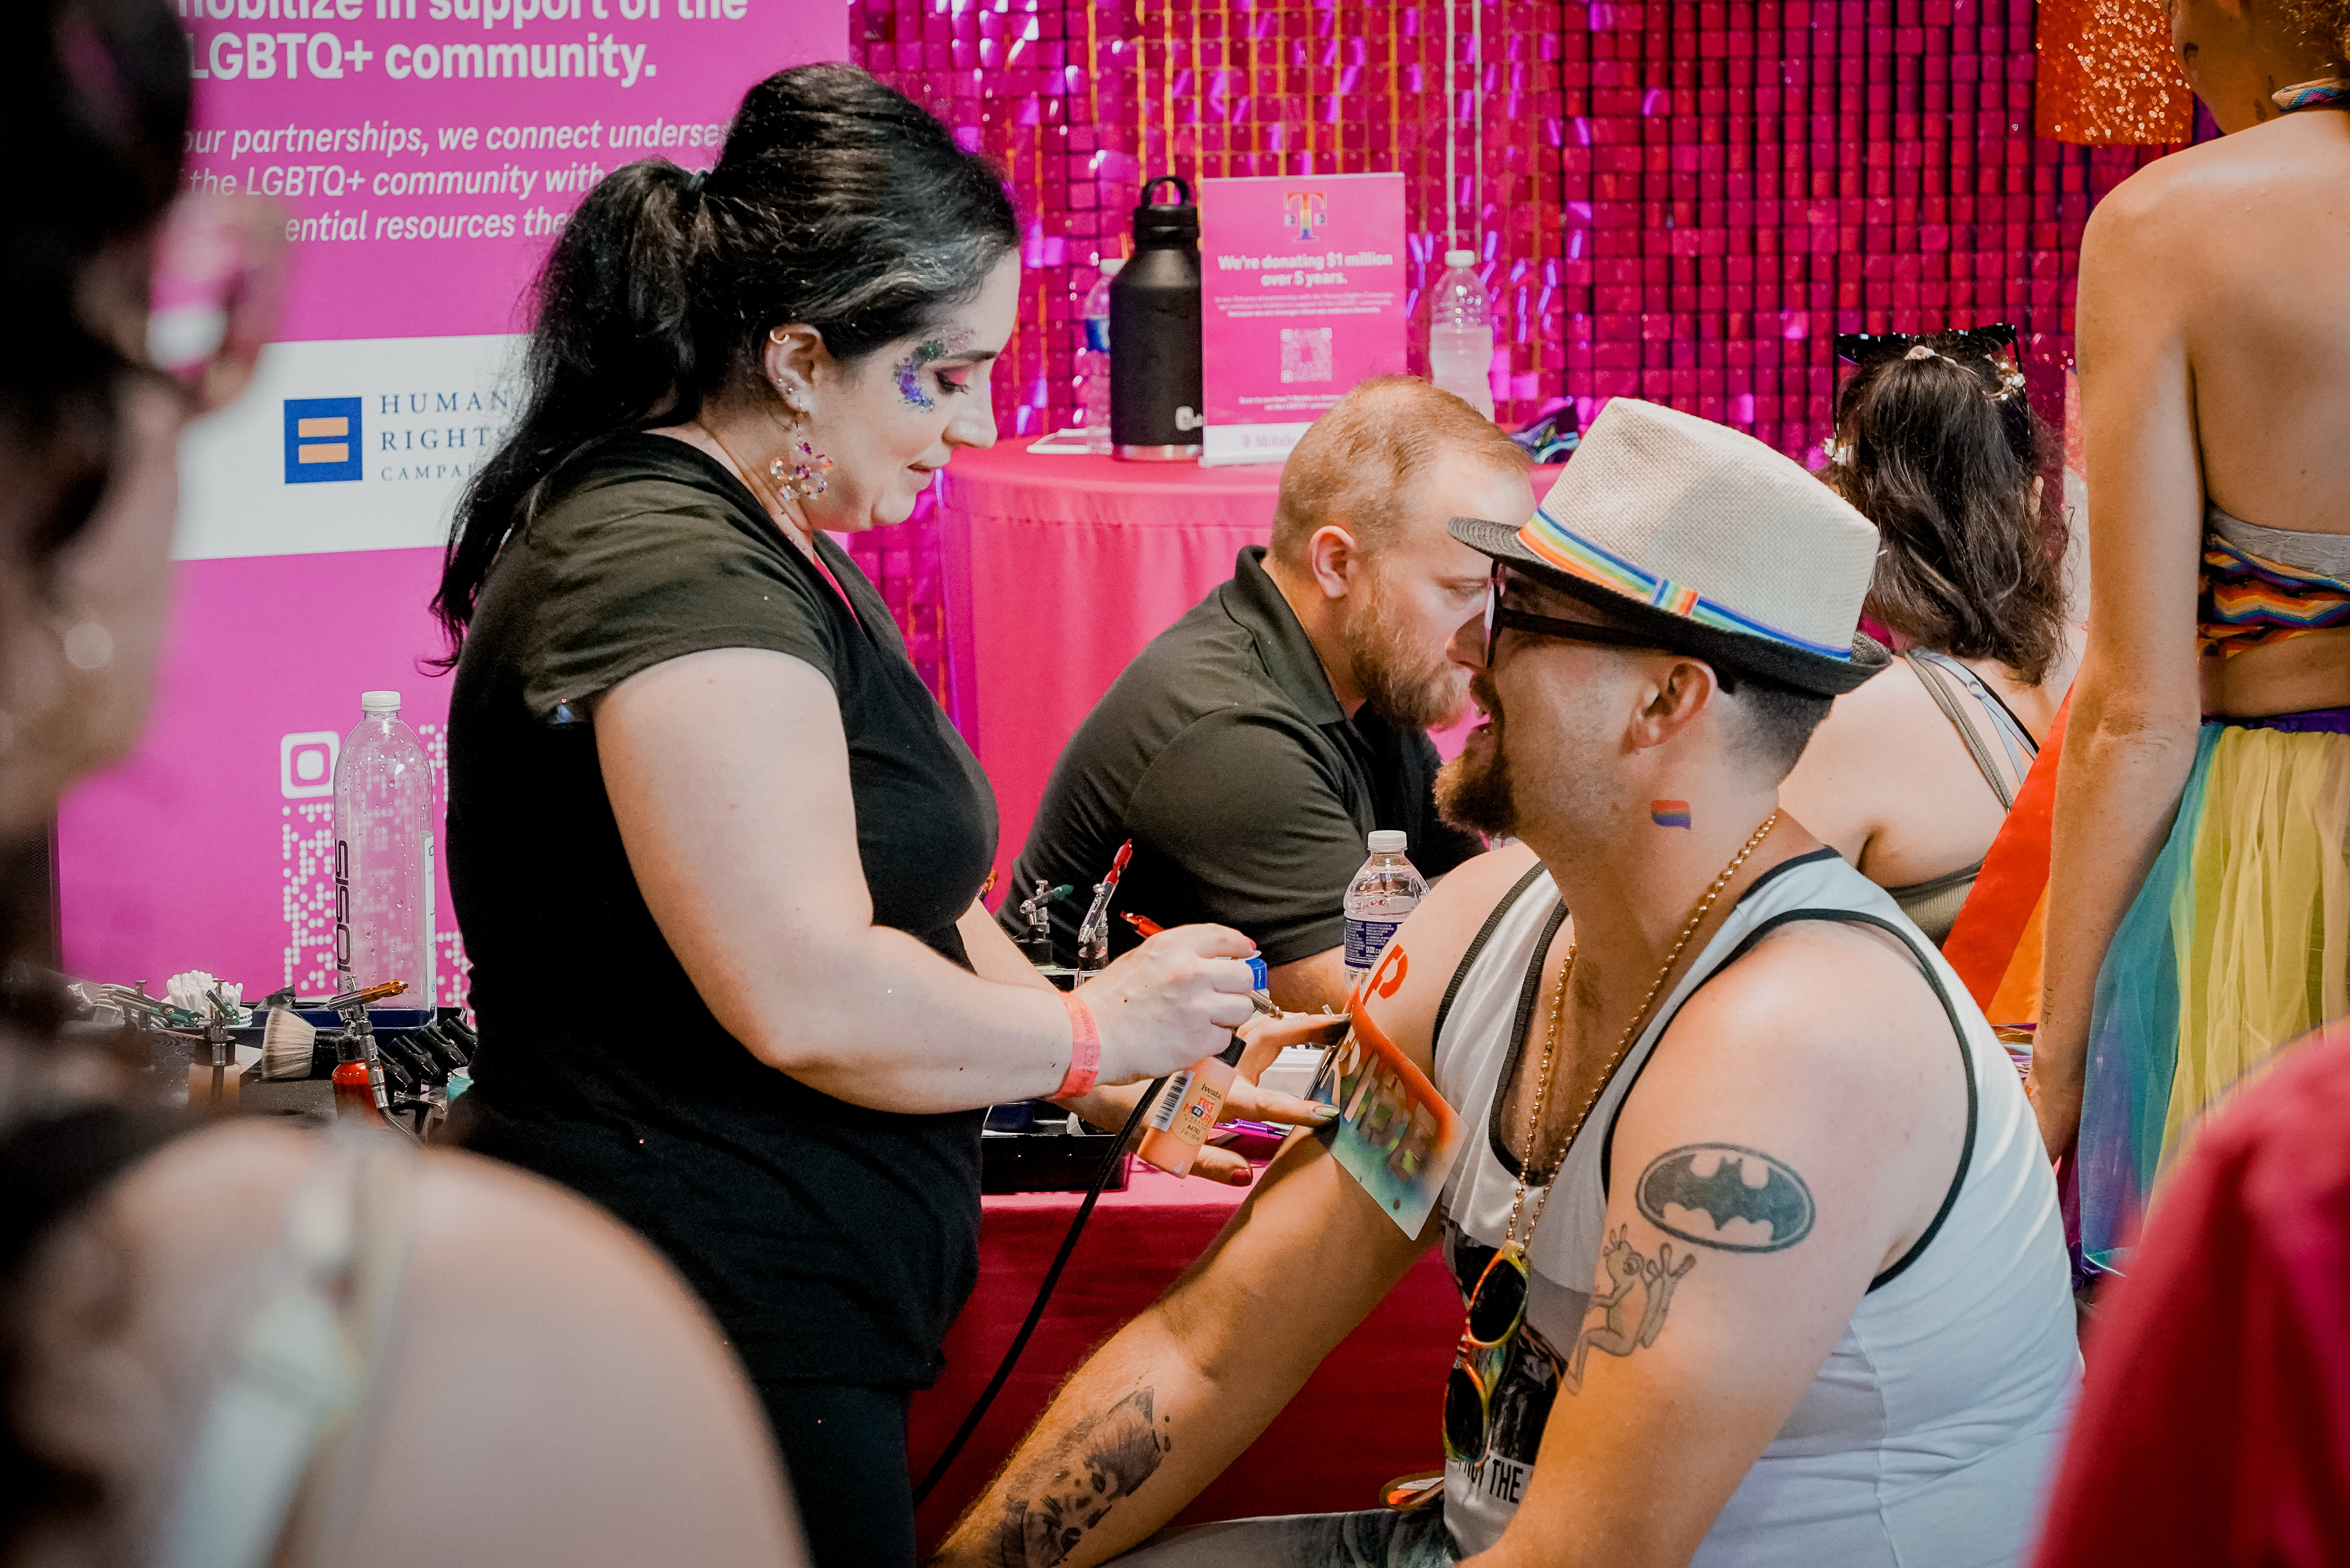 A person giving another person an airbrush tattoo